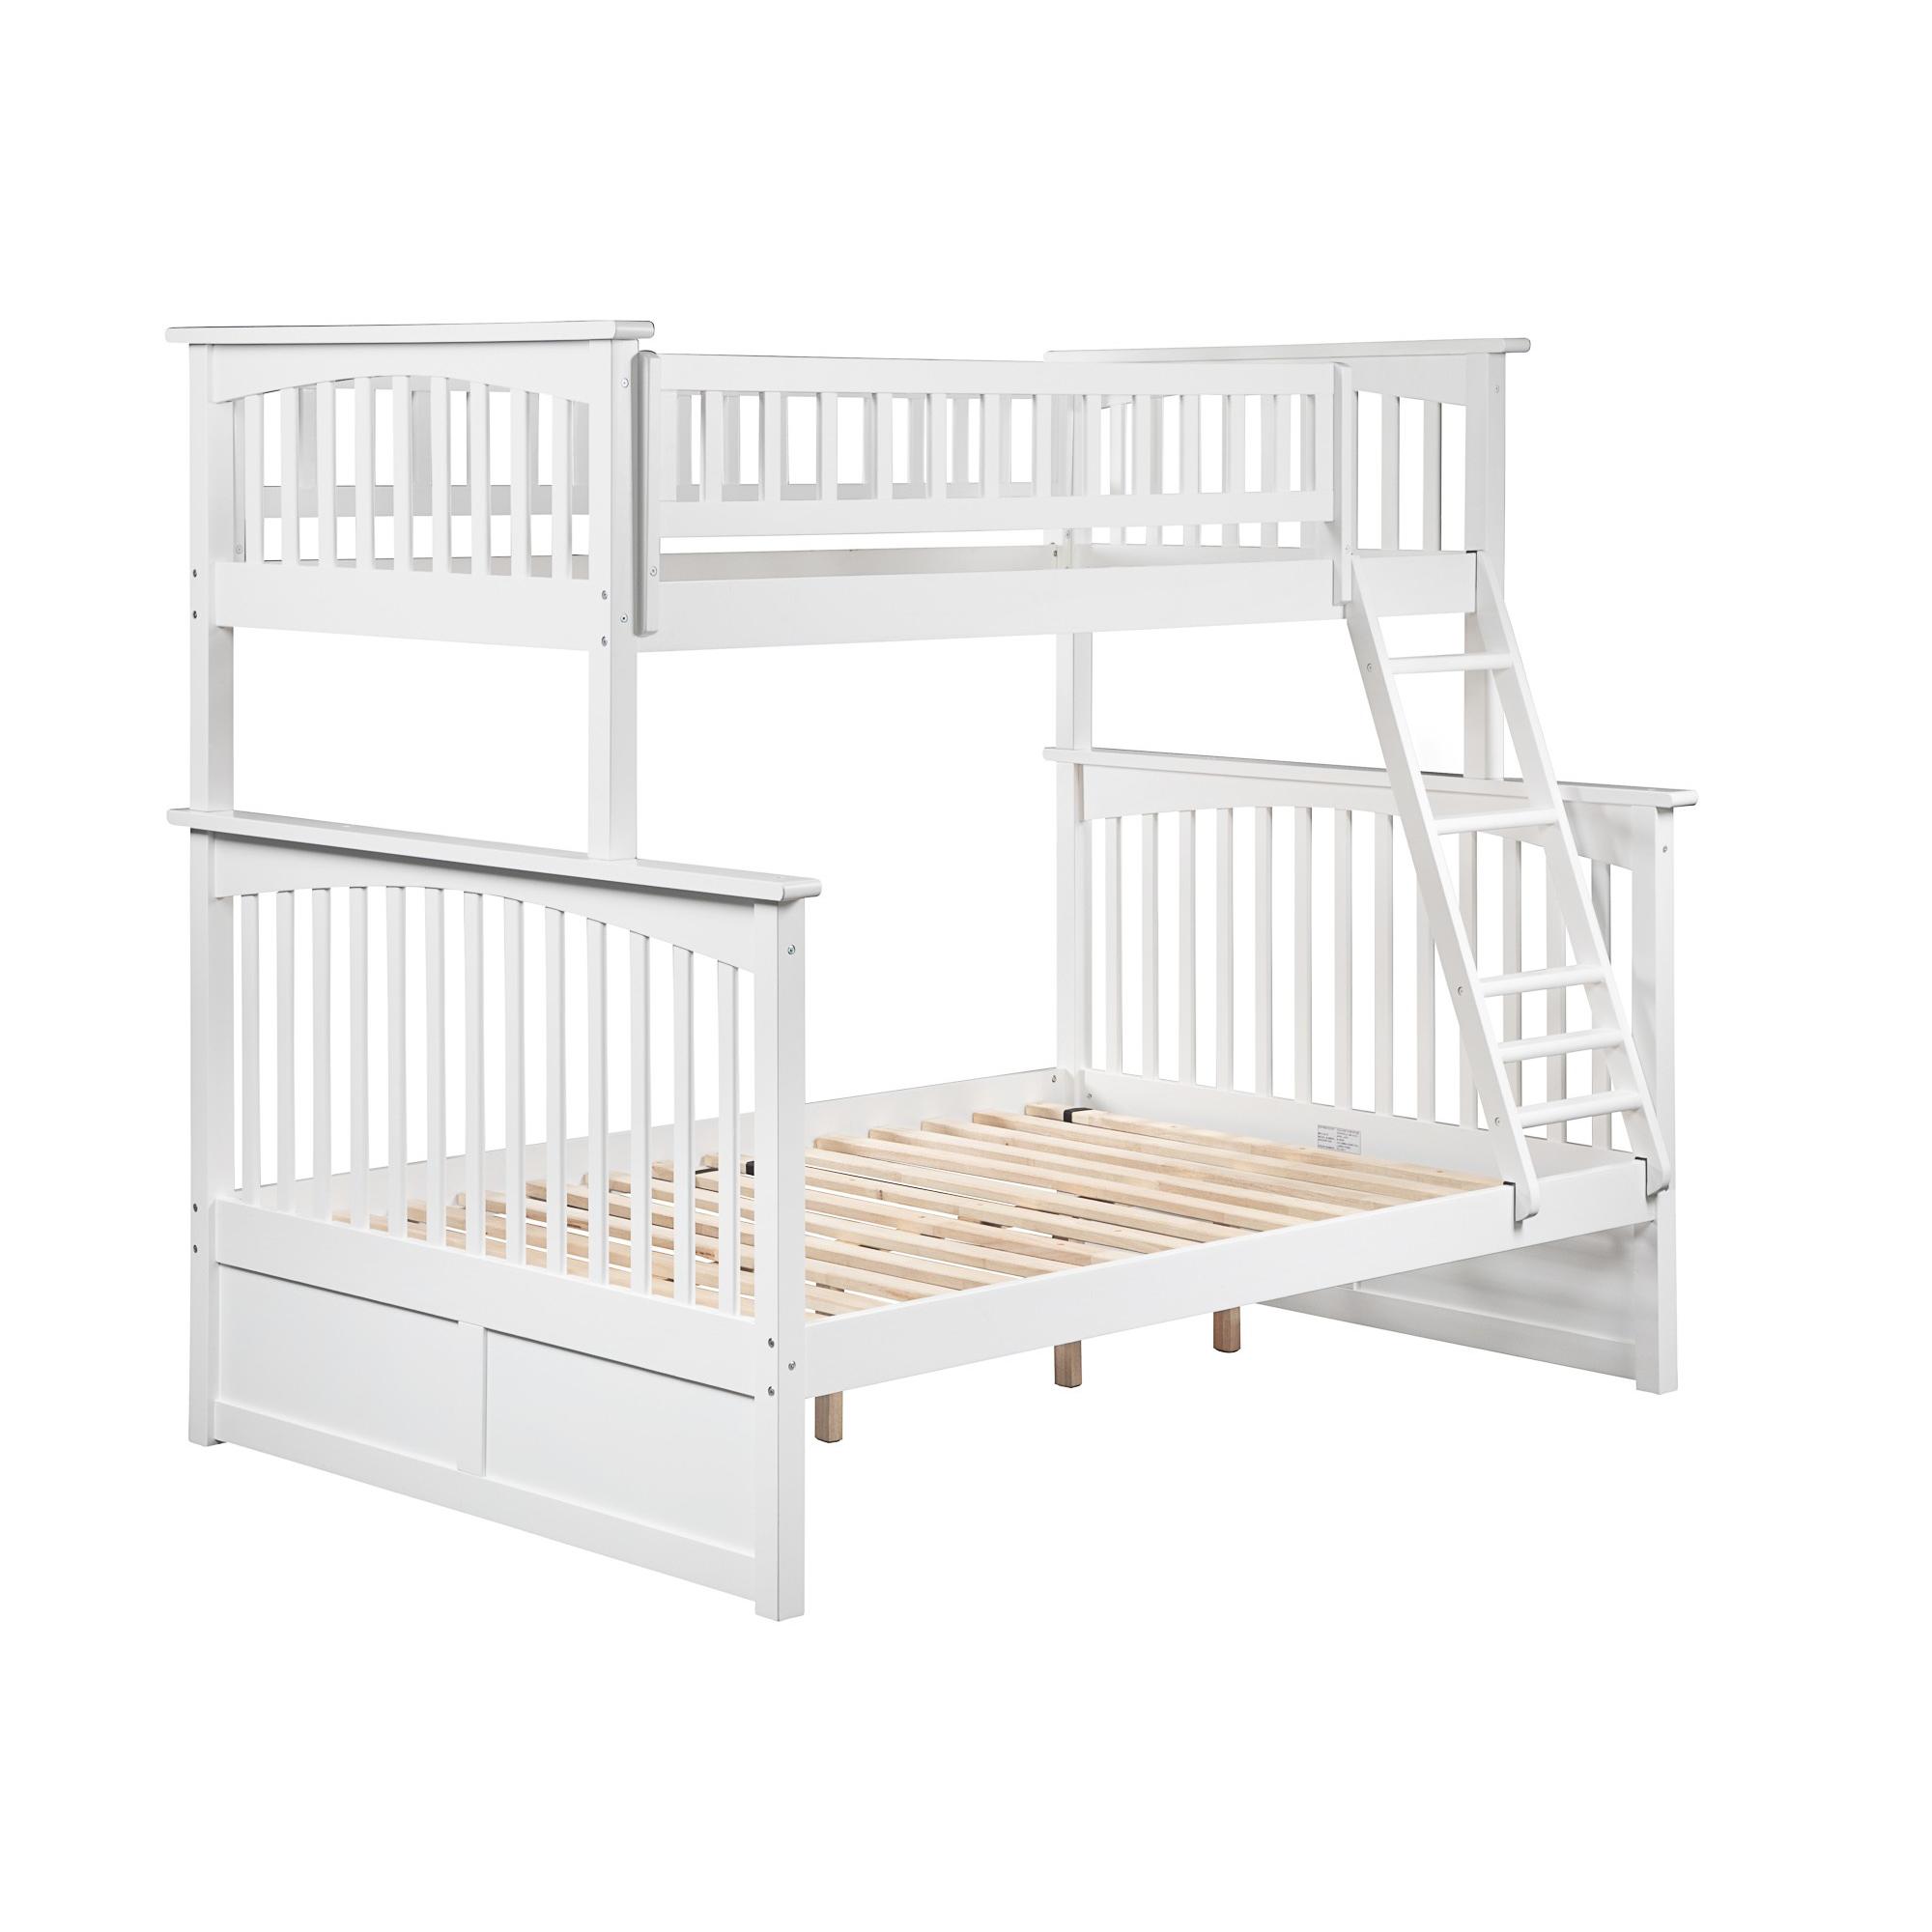 Columbia Bunk Bed Twin over Full in Multiple Colors and Configurations - image 5 of 5